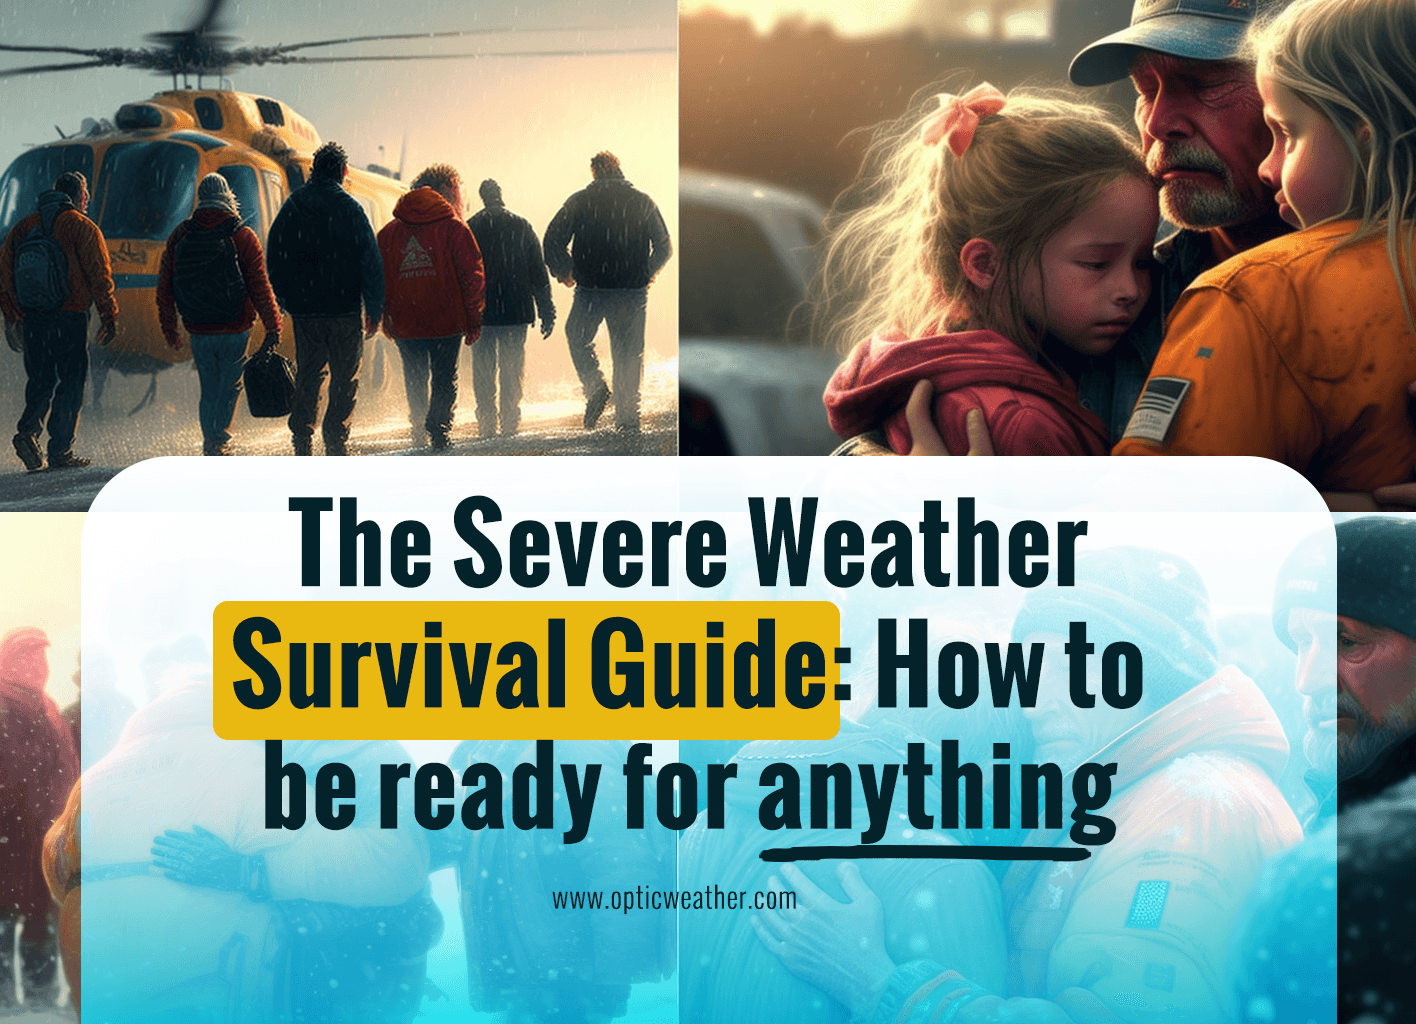 The severe weather survival guide: How to be ready for anything